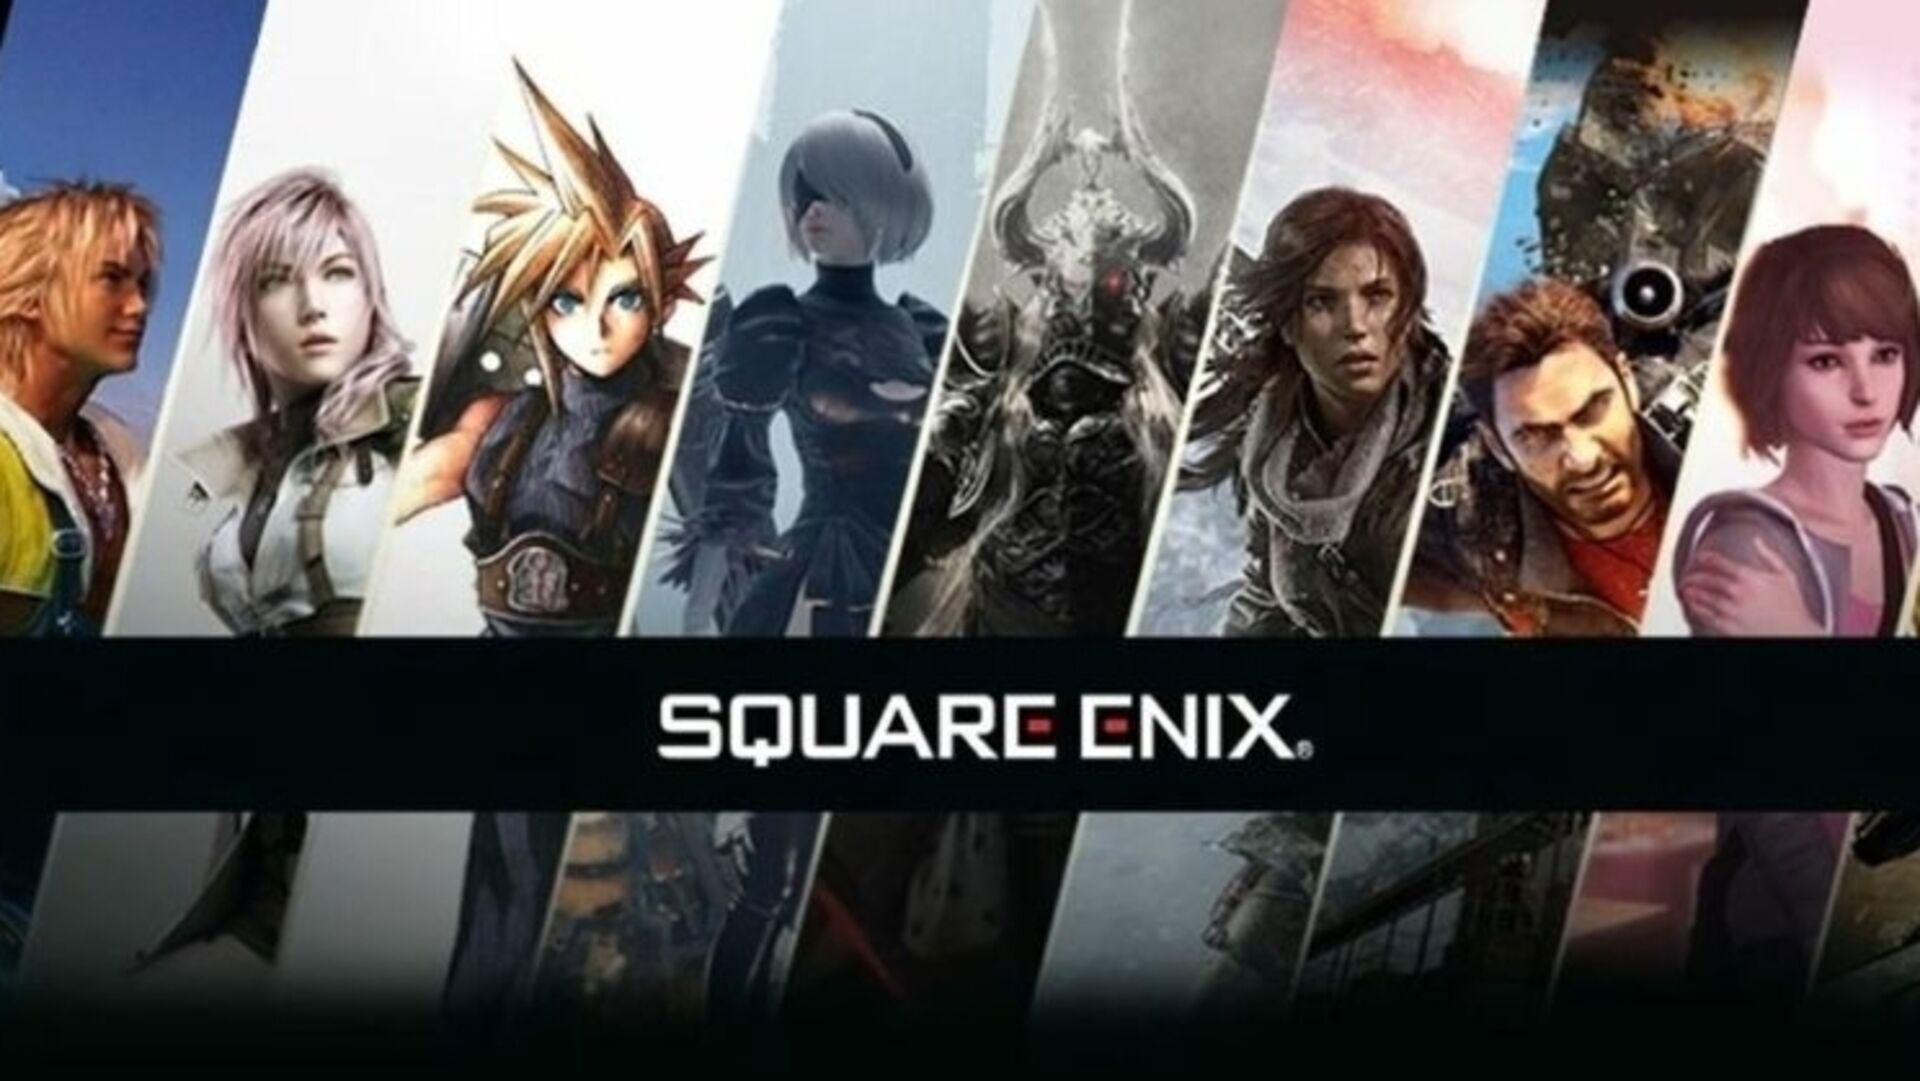 Square Enix, a Japanese entertainment company, is jumping into the blockchain gaming craze.